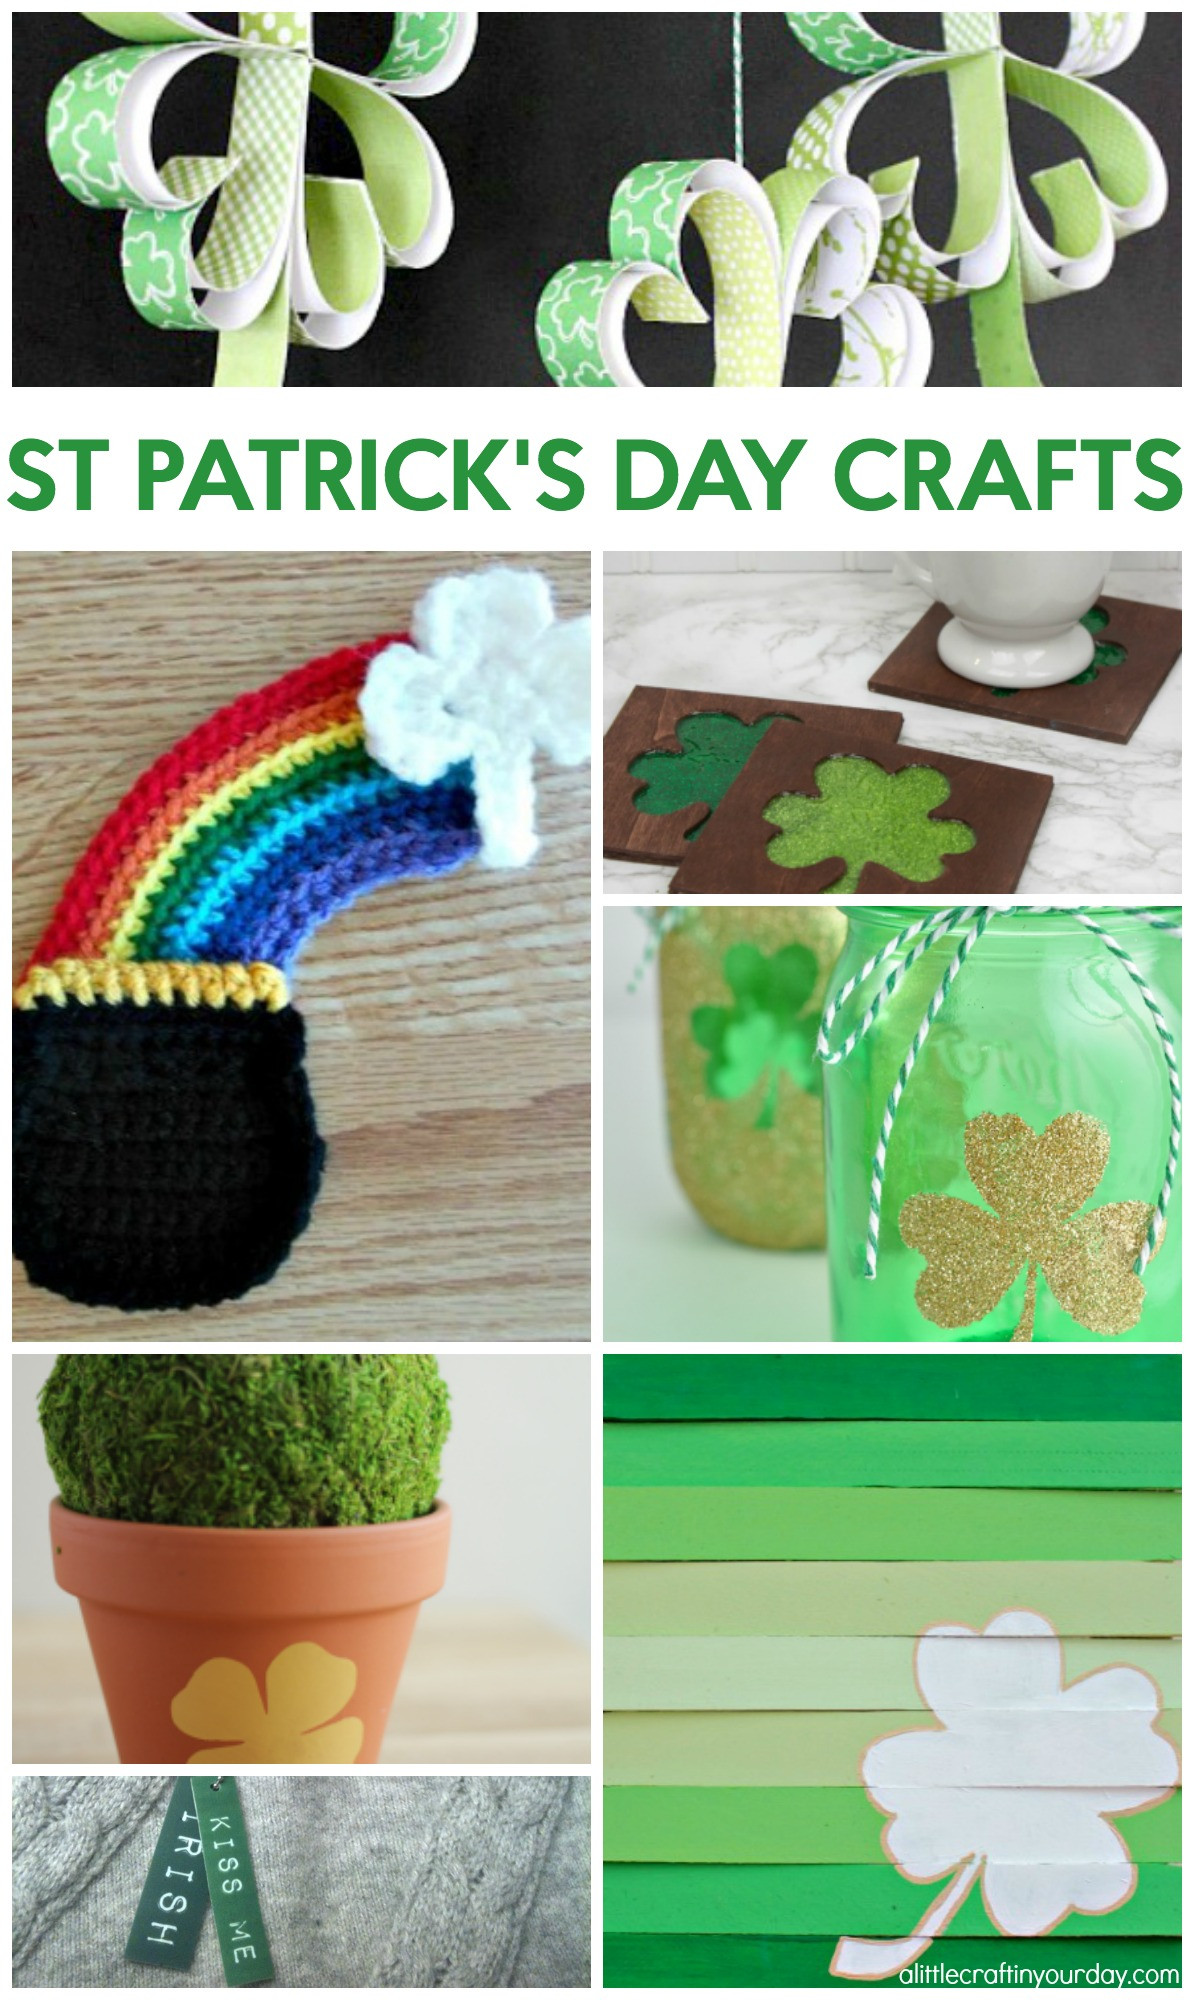 Saint Patrick's Day Crafts
 St Patrick’s Day Crafts A Little Craft In Your DayA